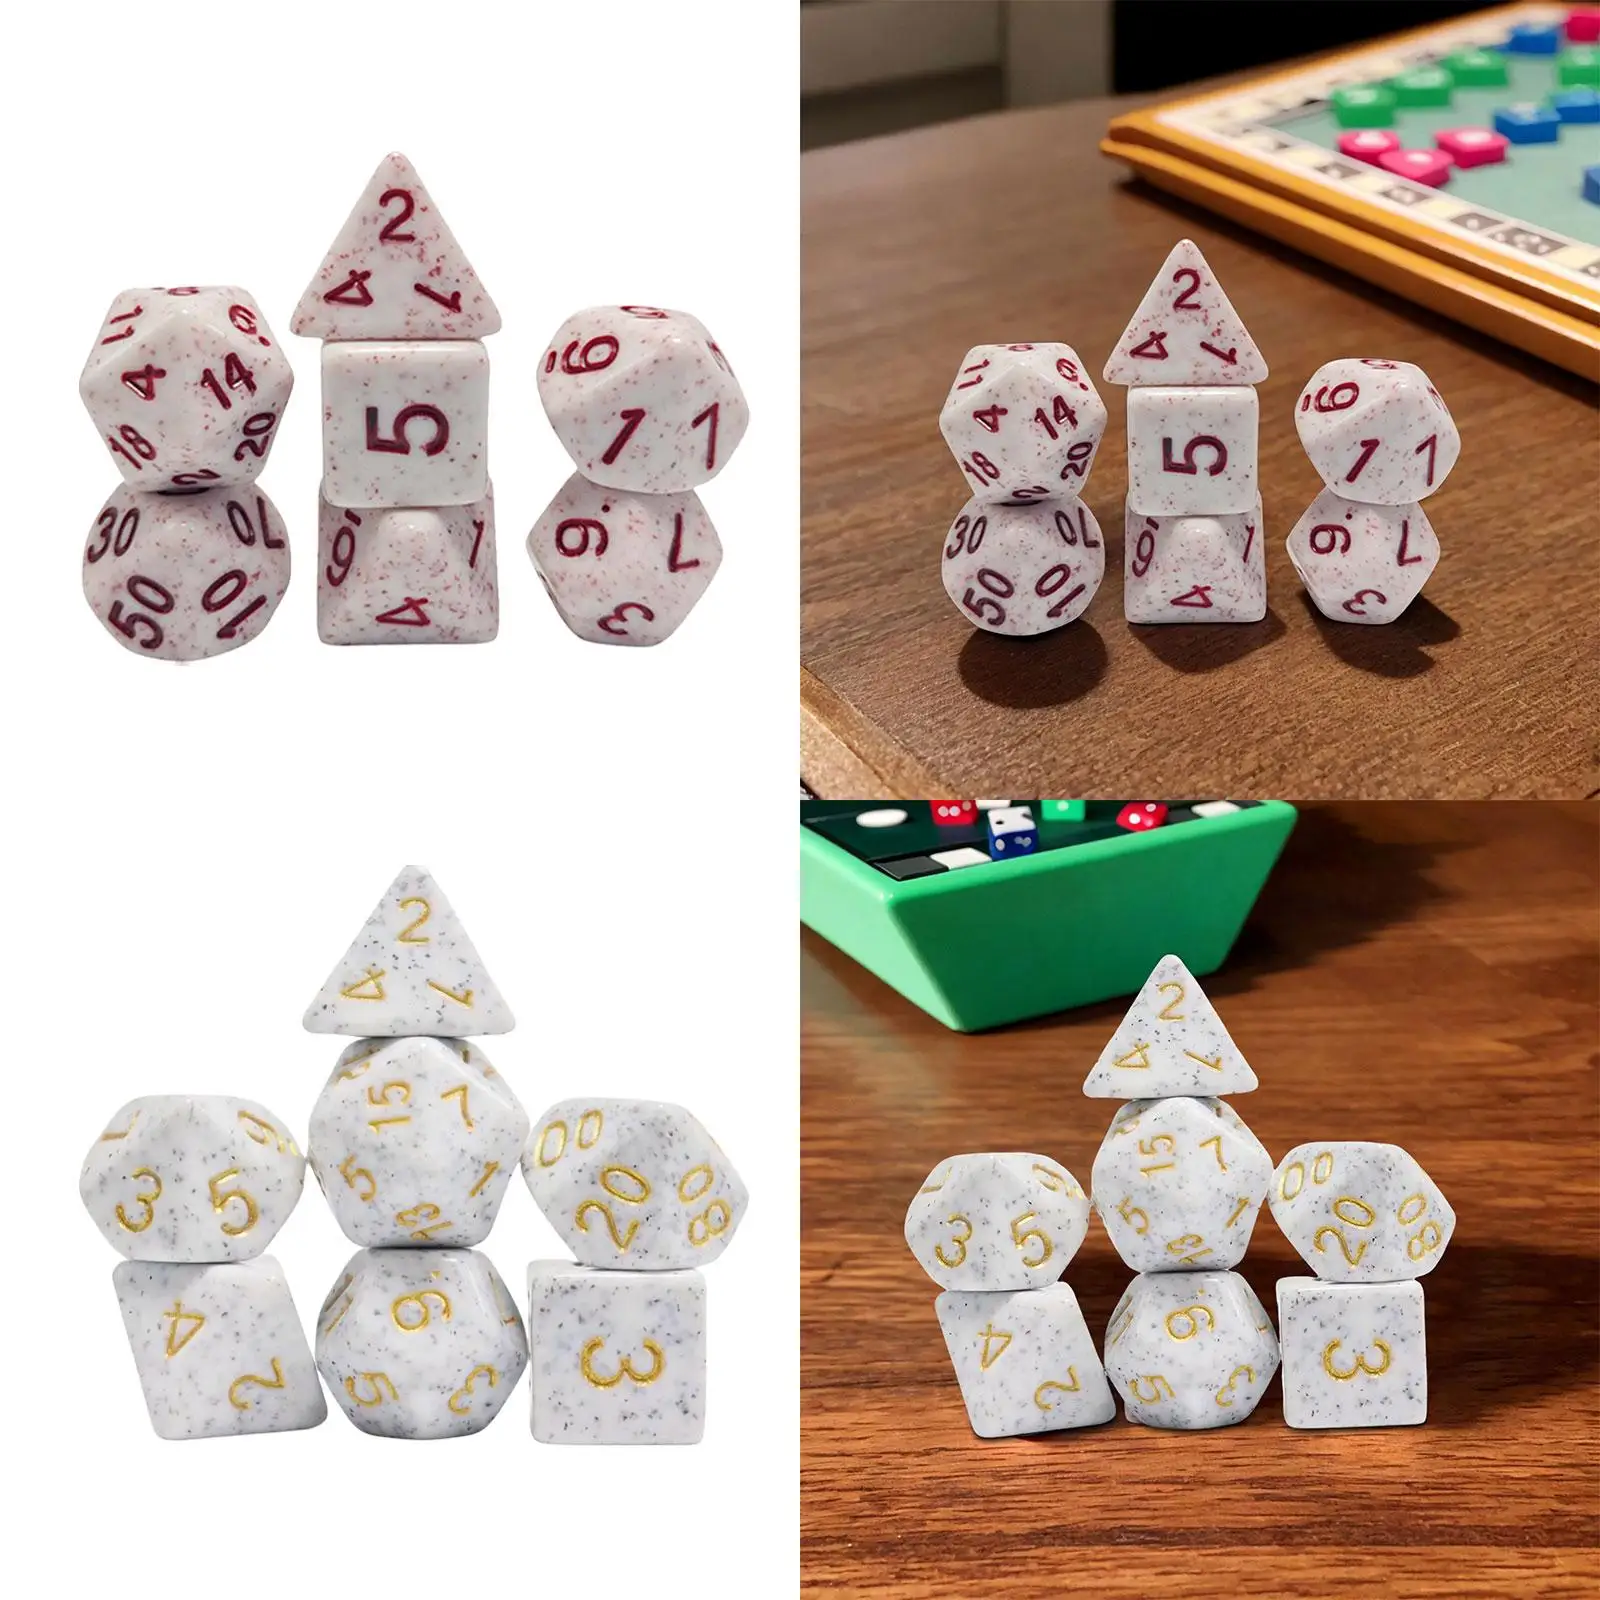 7Pcs Multi Sided Game Dices Acrylic Math Teaching Toys Party Favors Dice Set for Bar Party KTV Board Game Role Playing Game